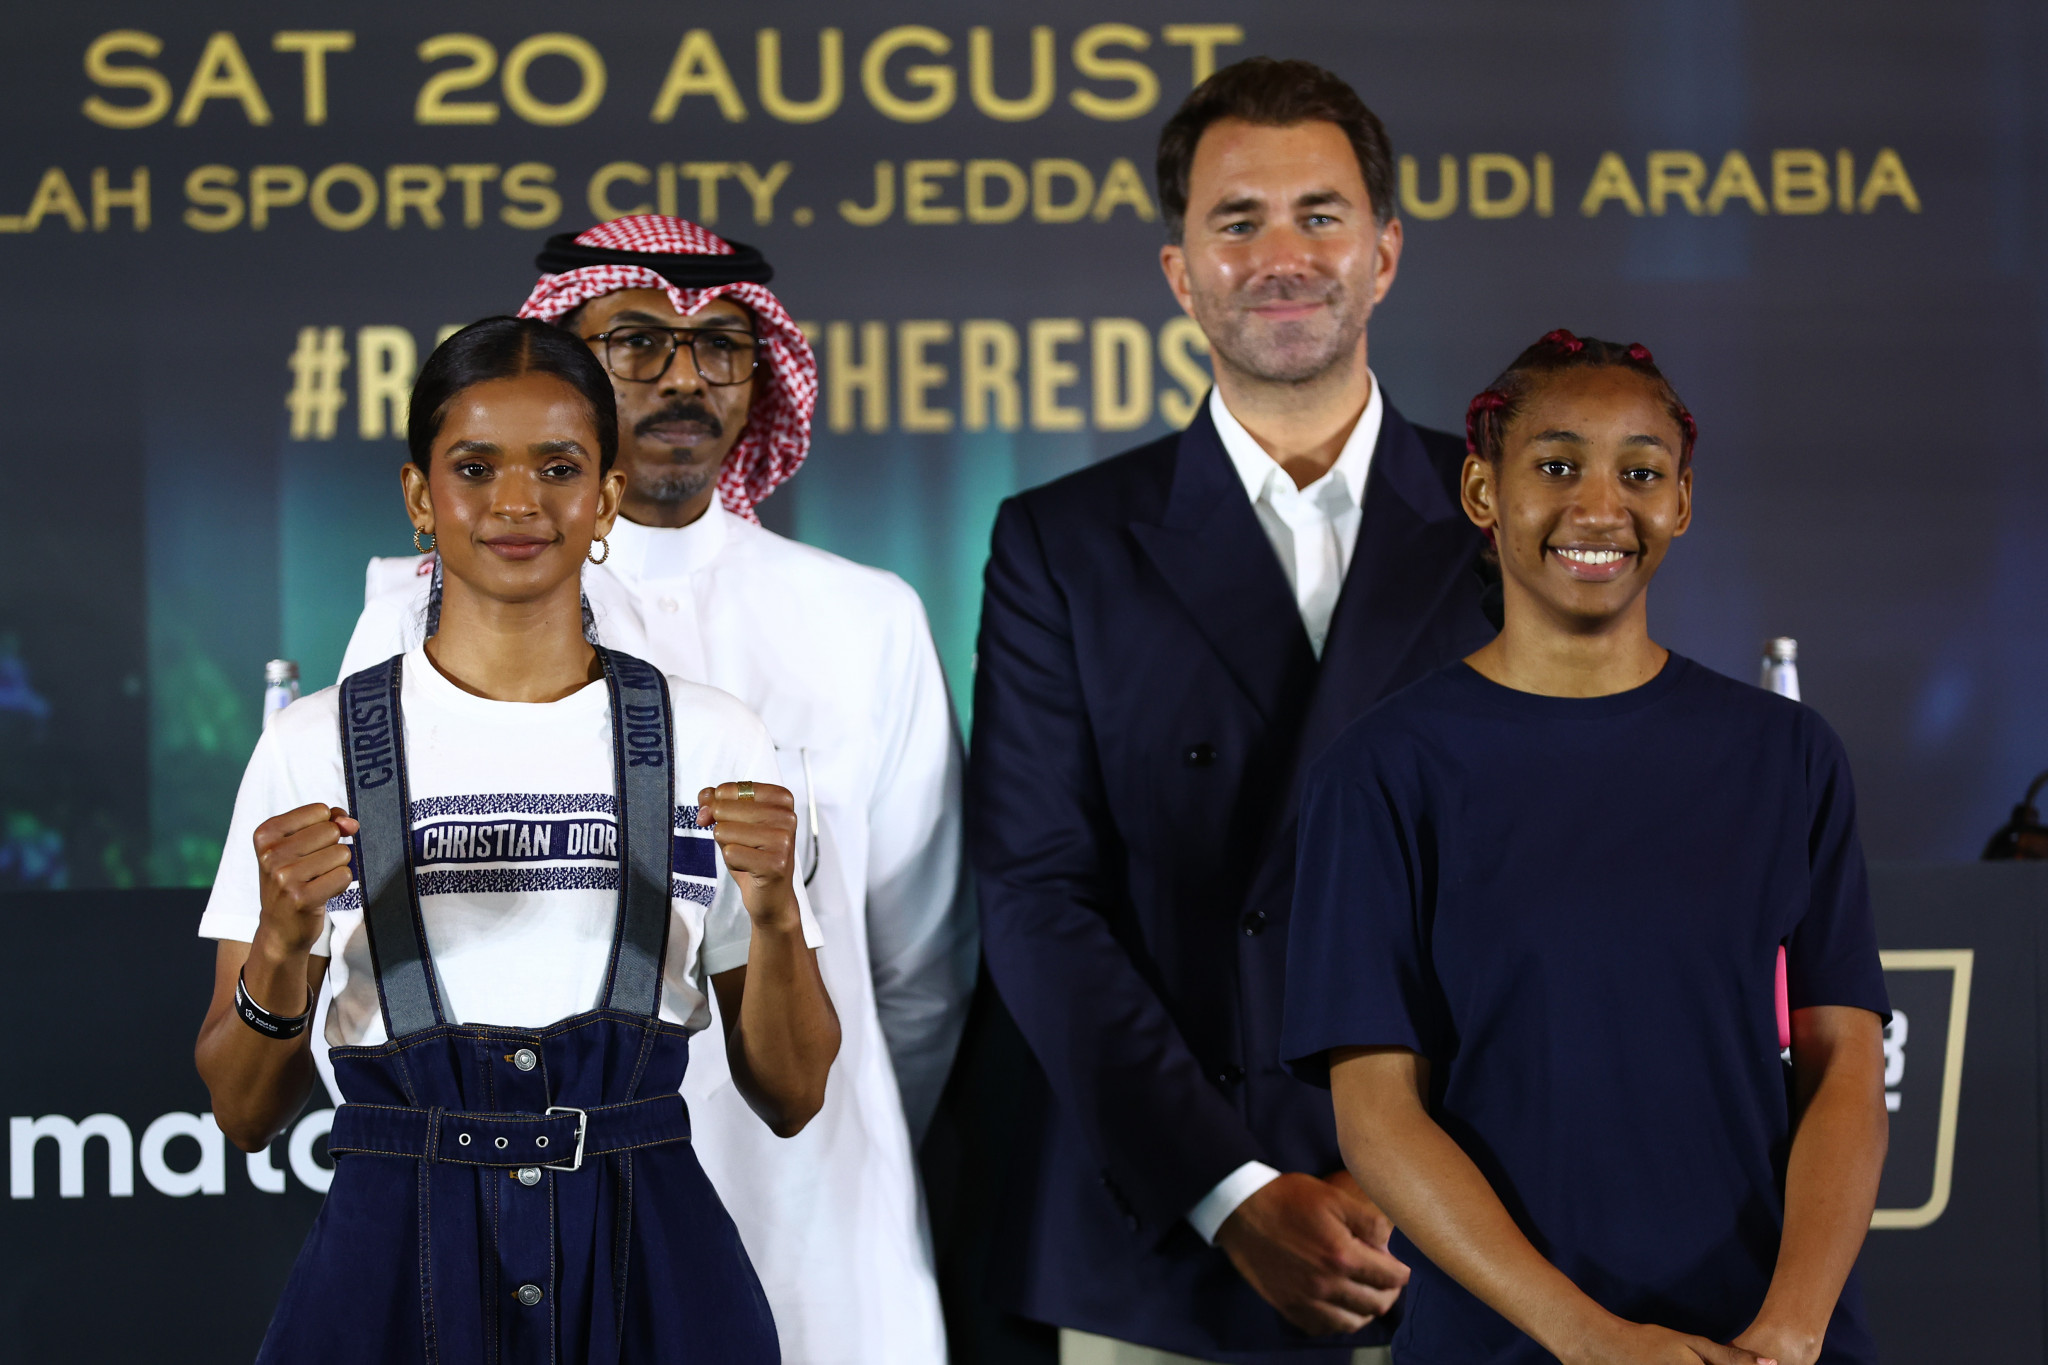 Somalian Ramla Ali, left, and Crystal Garcia Nova from the Dominican Republic will face each other in the first all-female fight in Saudi Arabia ©Getty Images